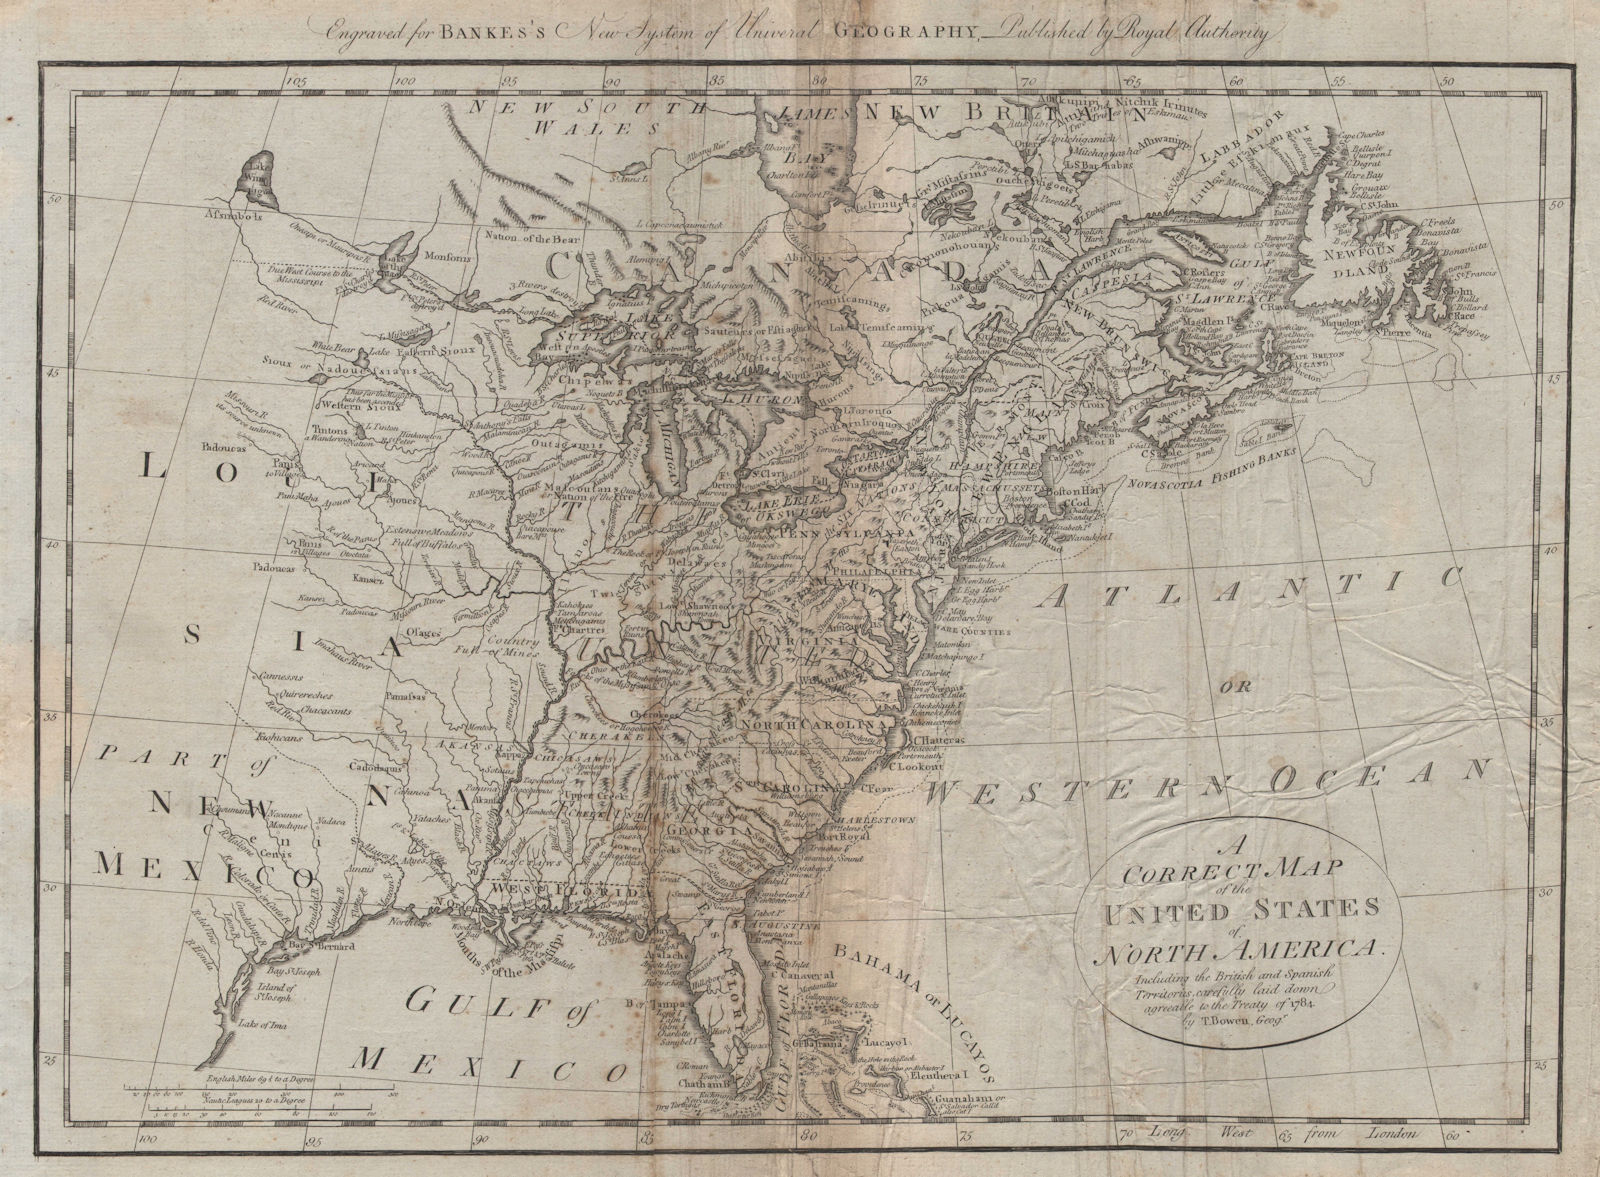 A correct map of the United States of North America, by Thomas BOWEN 1789